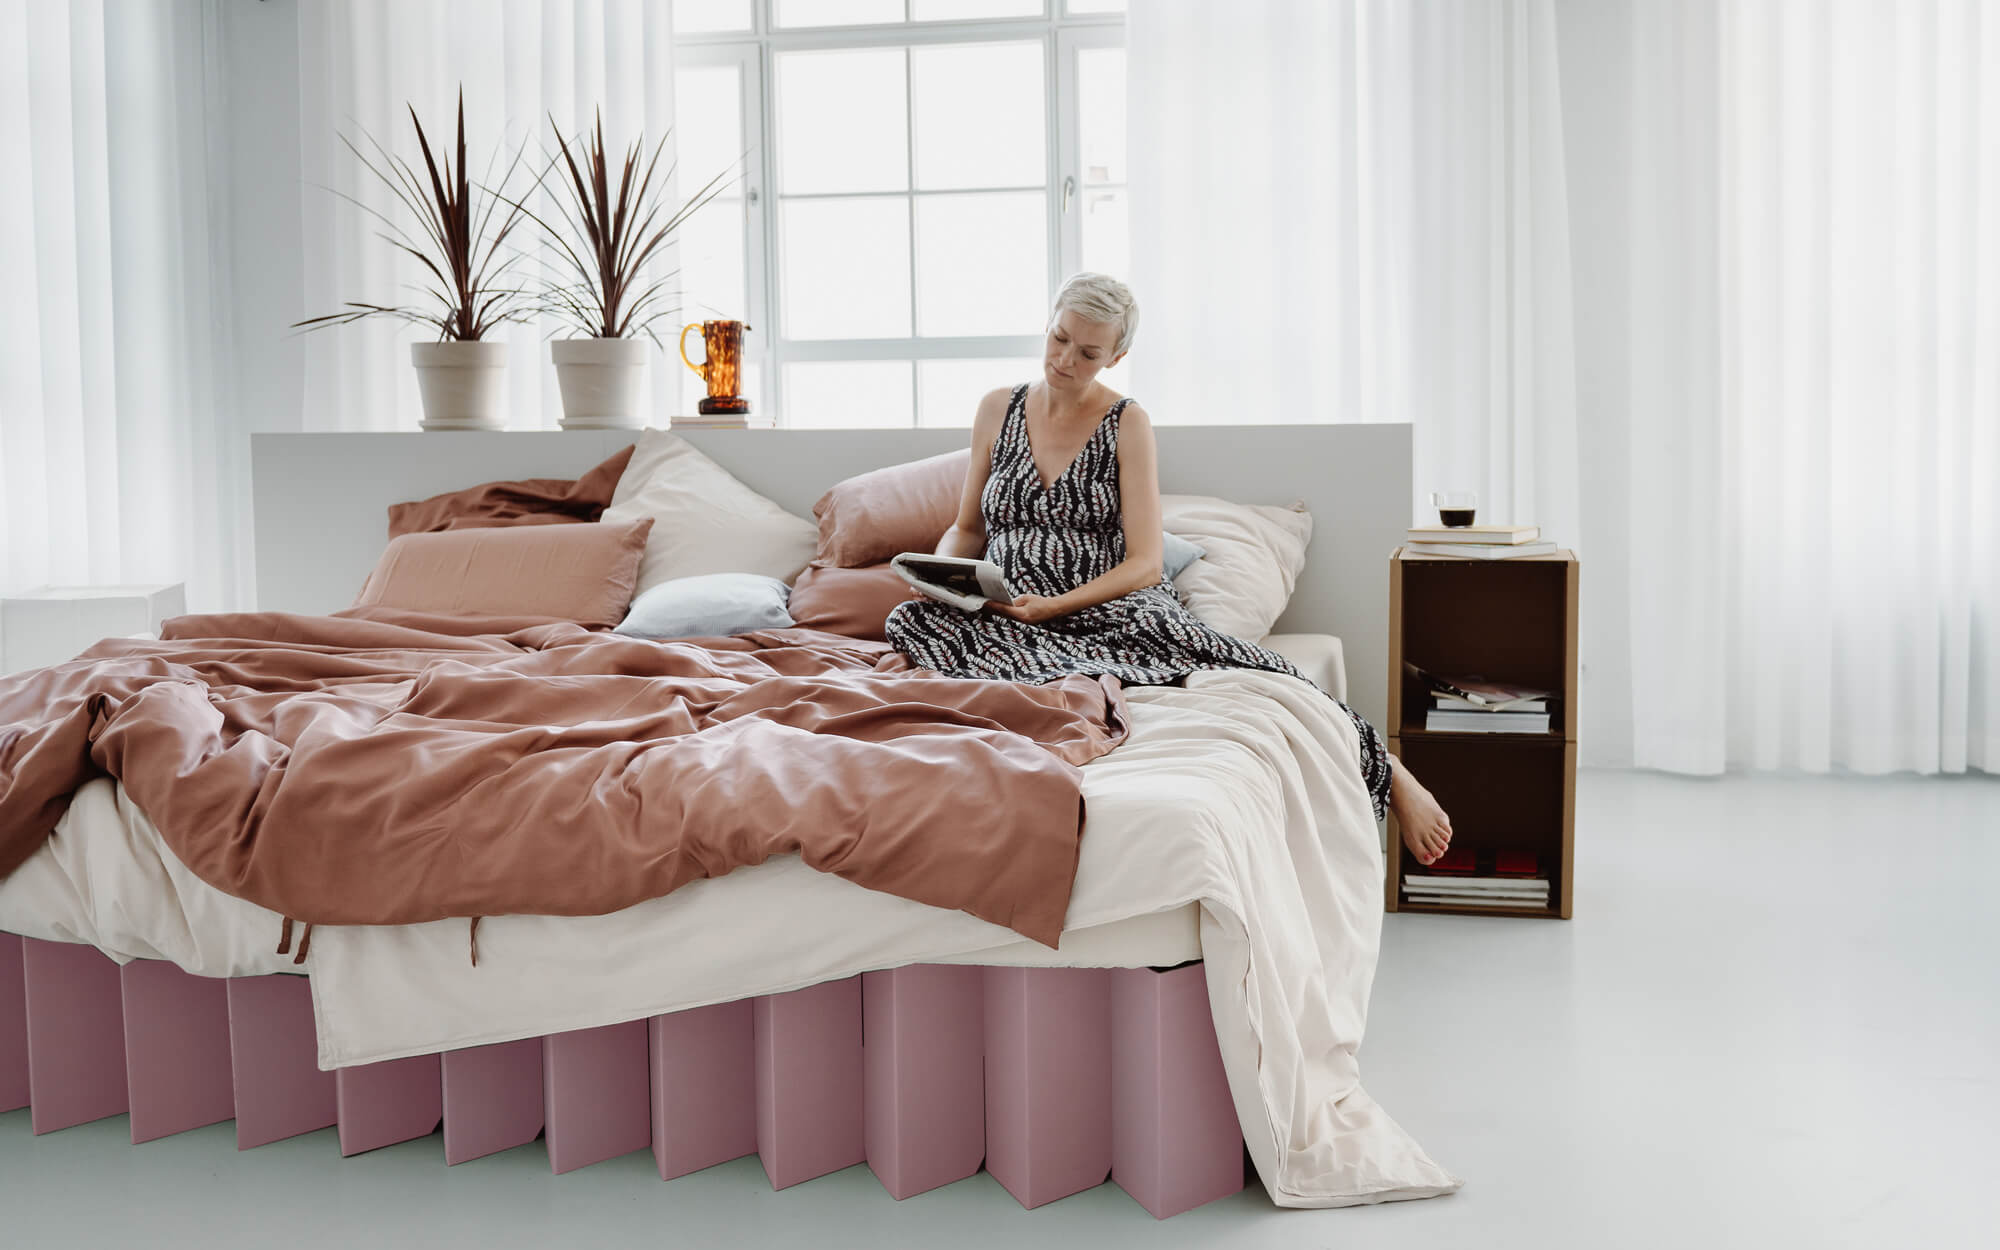 ROOM IN A BOX Bed 2.0 in rose as a family bed